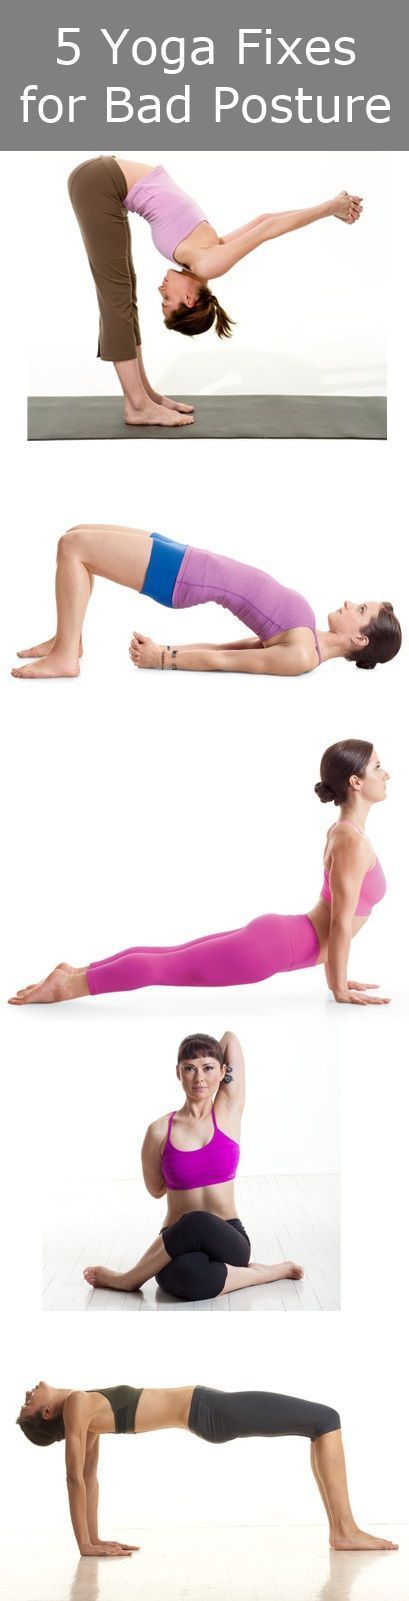 5 Yoga Fixes For Bad Posture. Prevent bad posture and scoliosis and back pain wi...